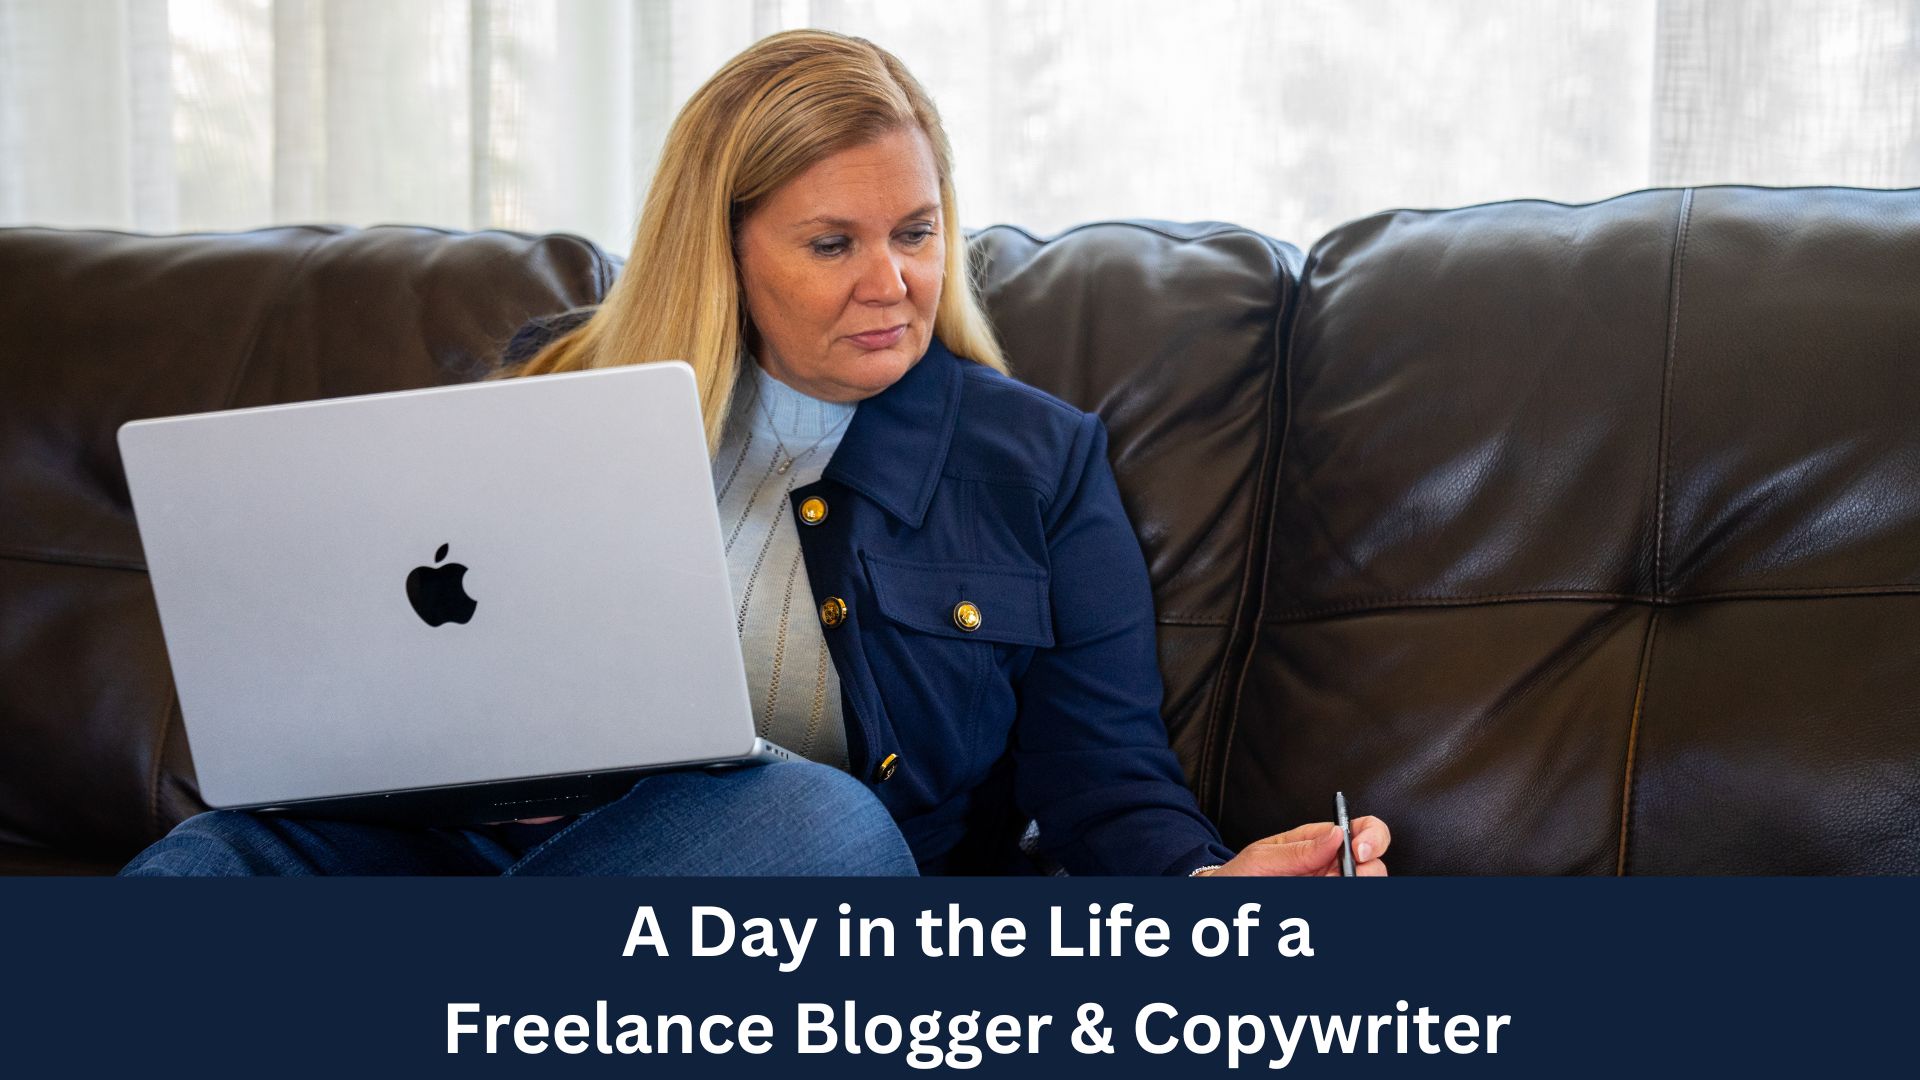 A Day in the Life of a Freelance Blogger & Copywriter: Yep, This is Me